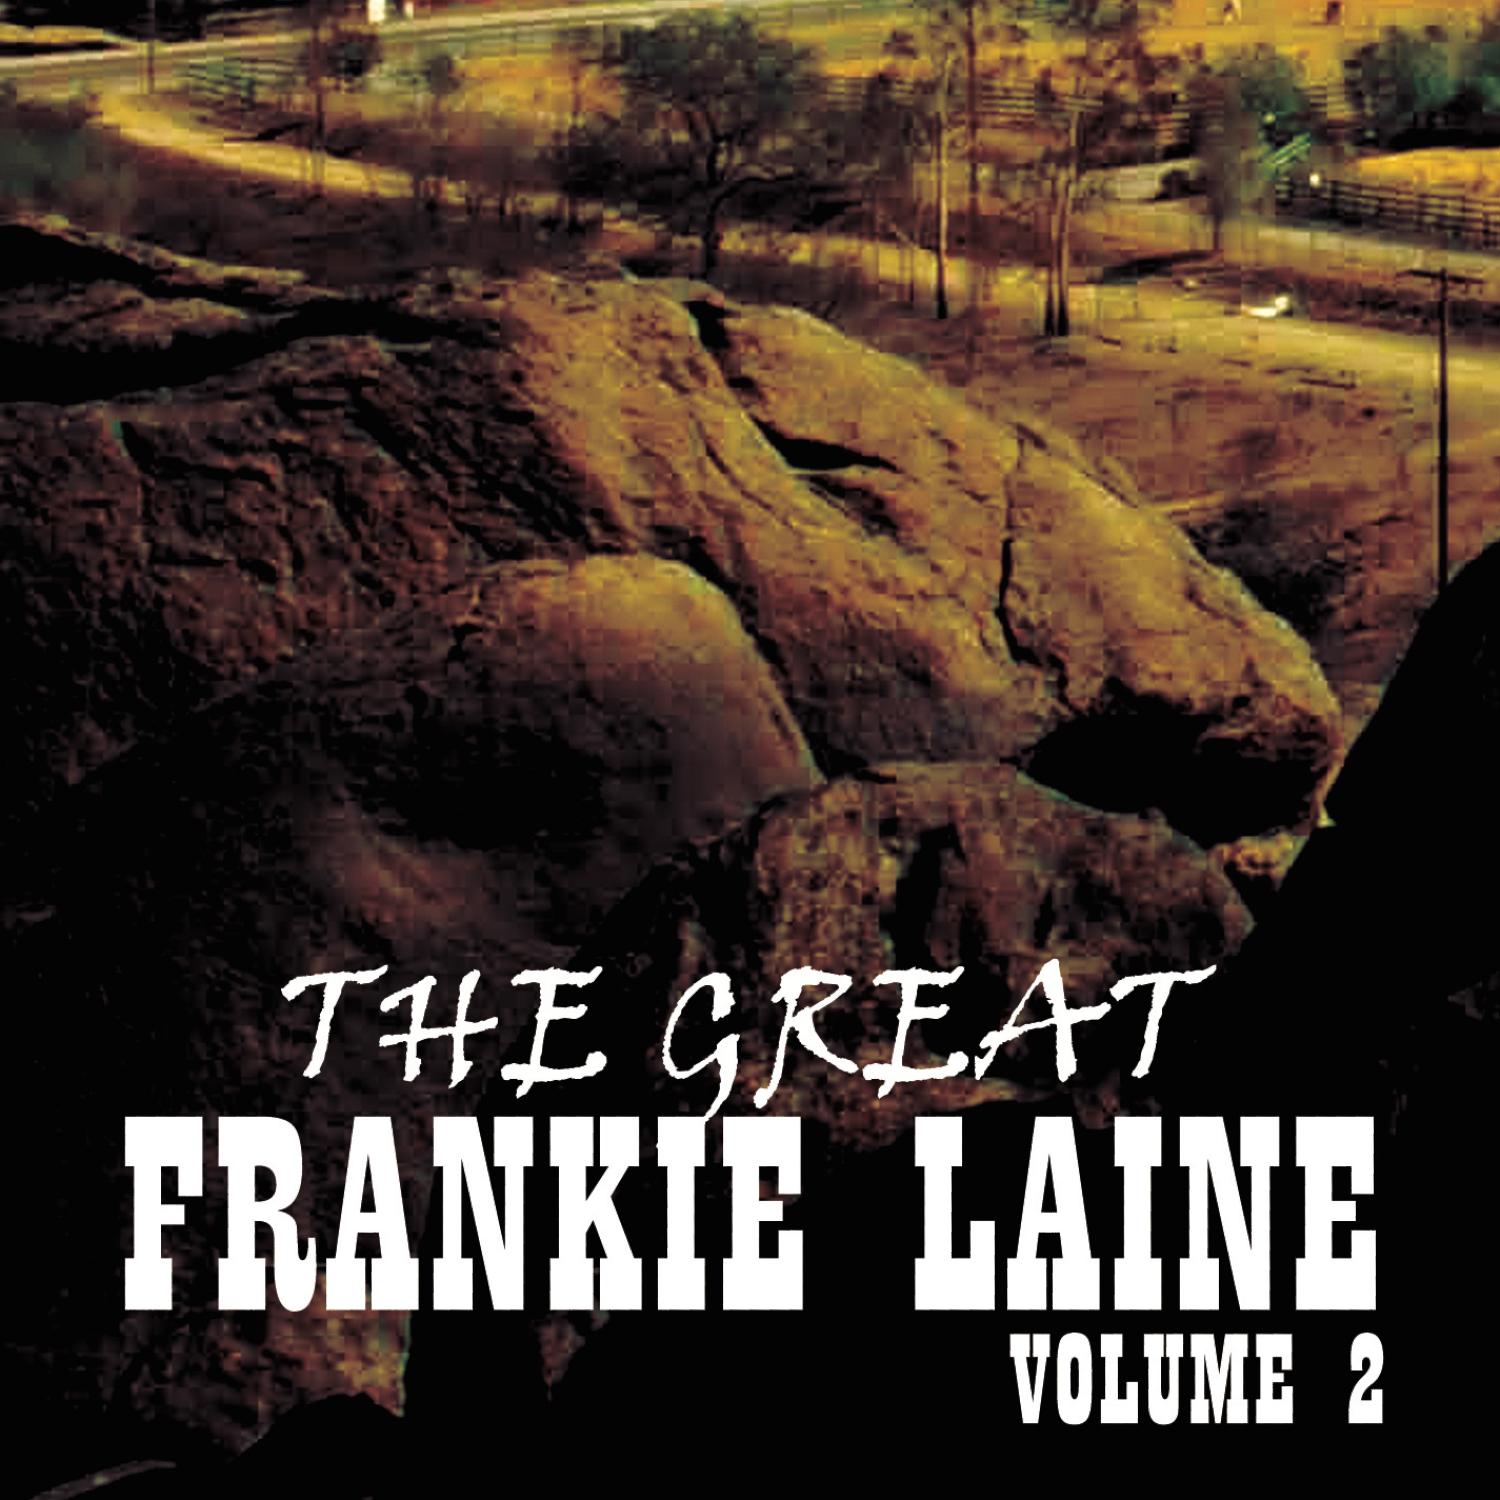 The Great Frankie Laine Volume 2